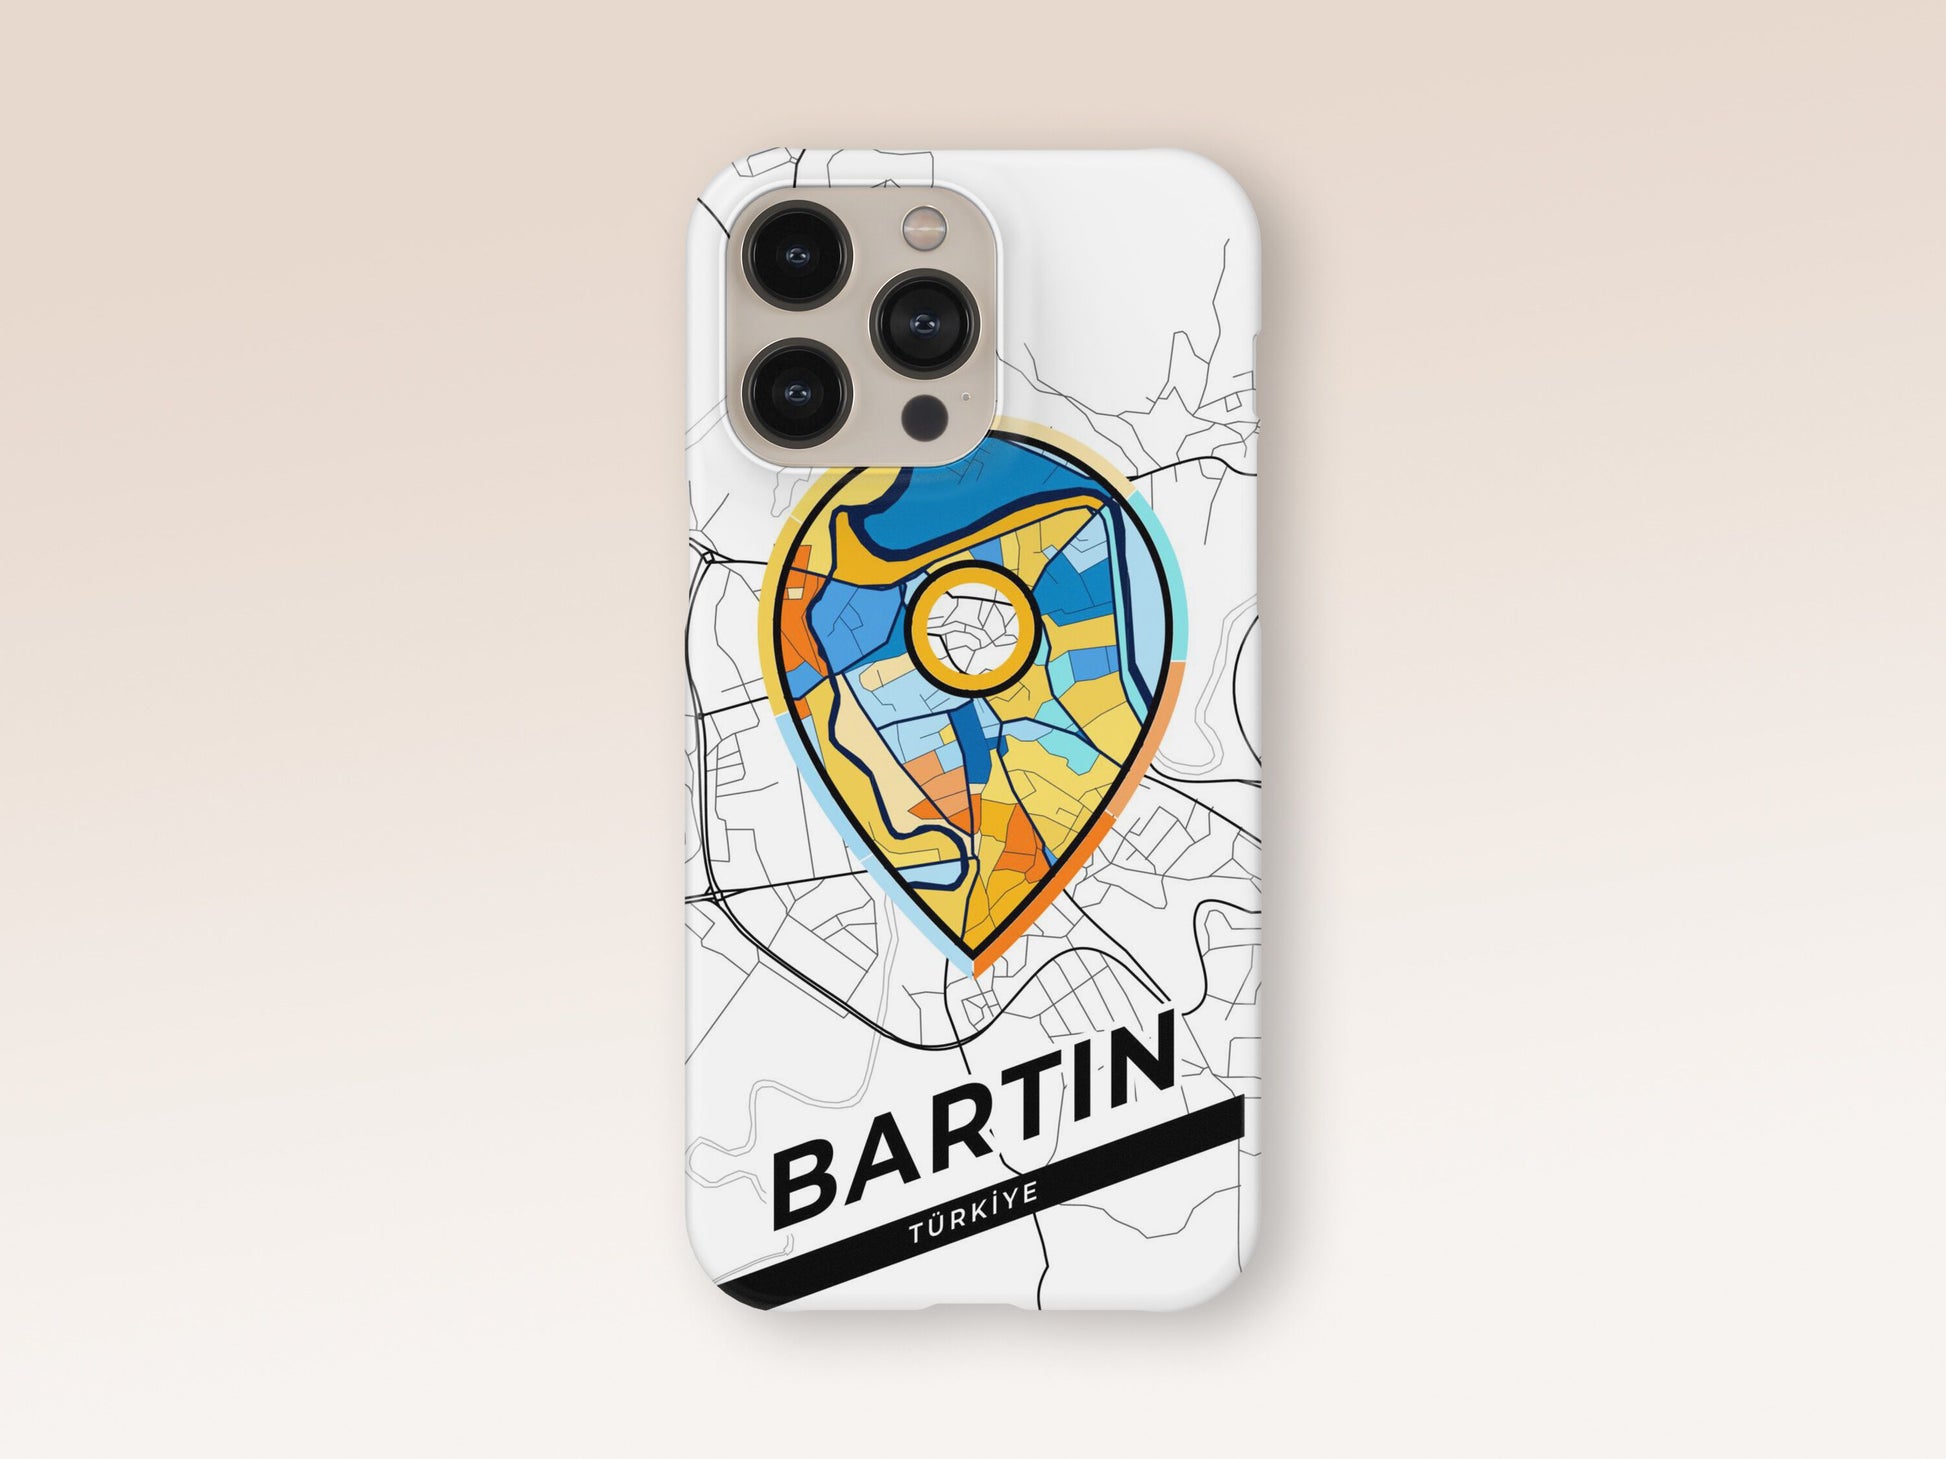 Bartın Turkey slim phone case with colorful icon. Birthday, wedding or housewarming gift. Couple match cases. 1